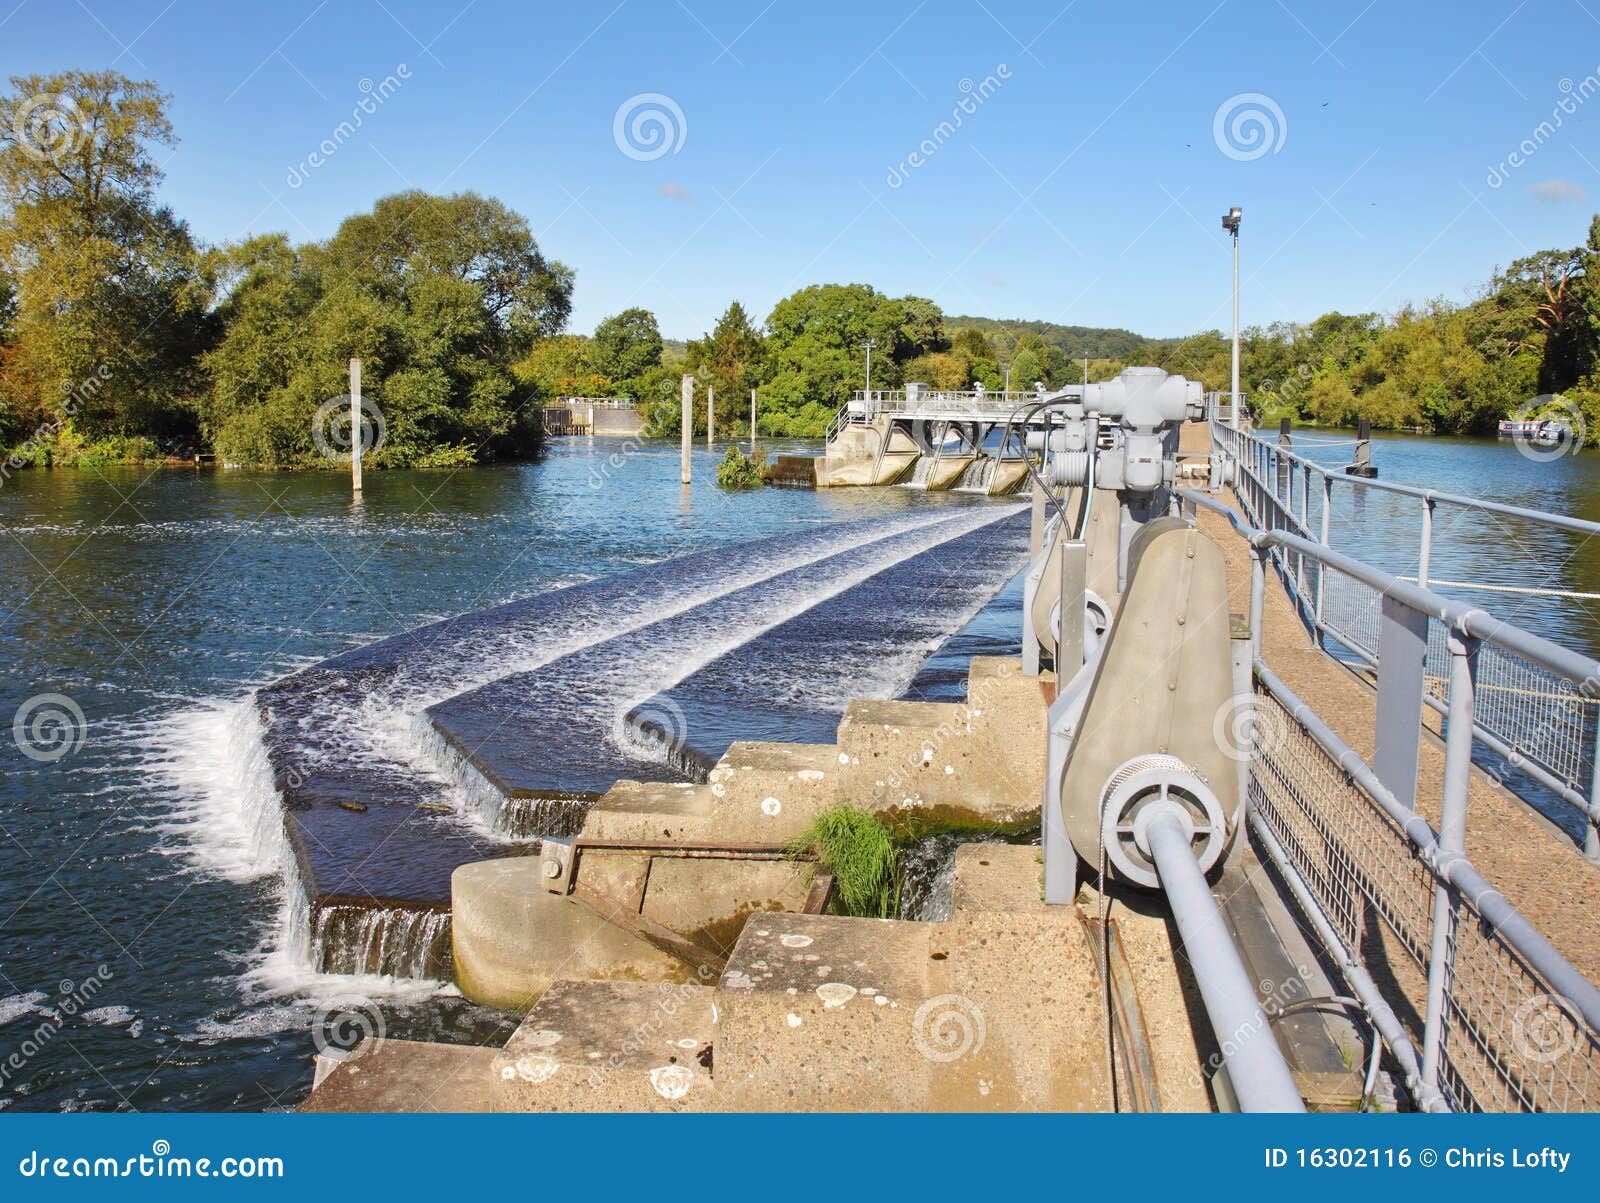 weir and sluice gate on the river thames